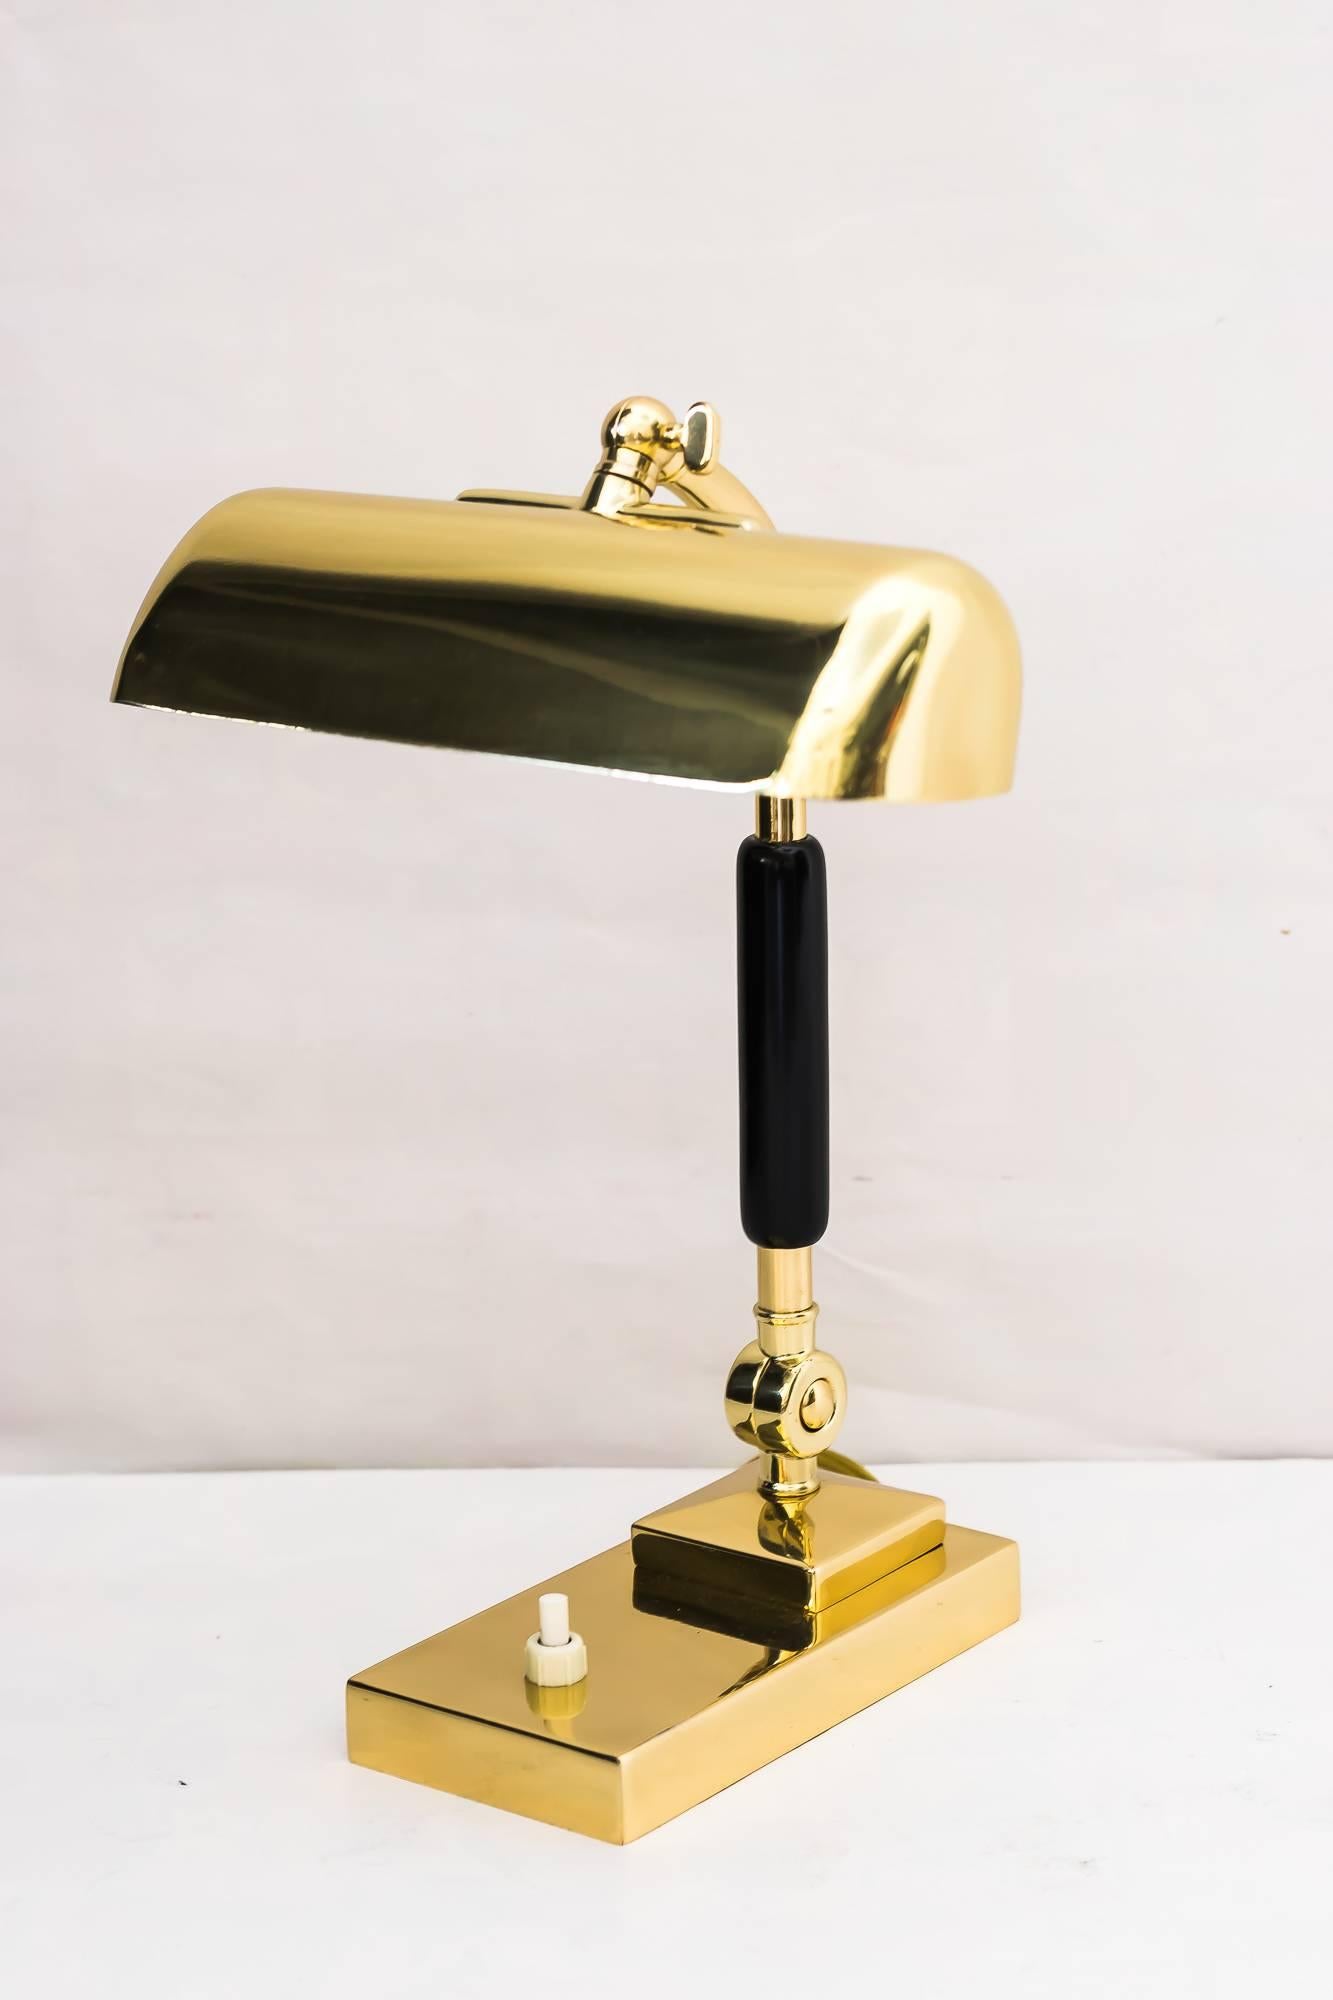 Art Deco table lamp with blackened wood, circa 1920s
apaolished and stove enamelled.